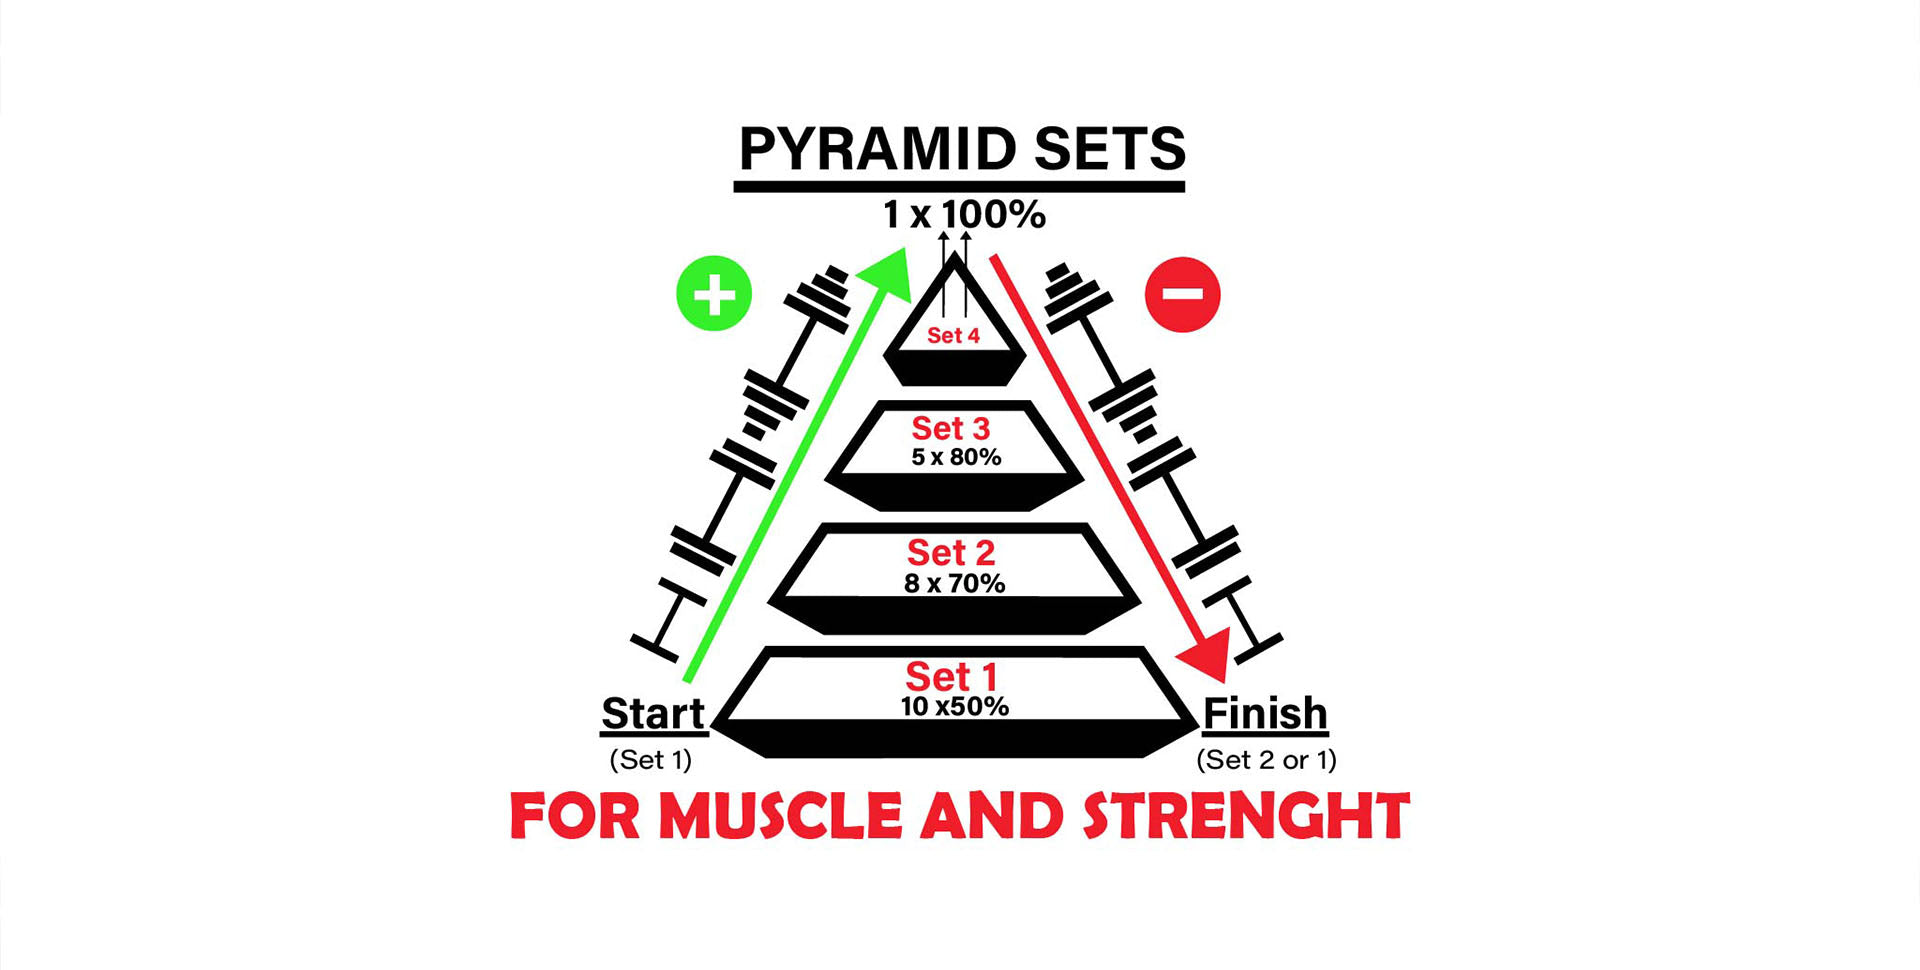 What Are Pyramid Sets? Guide to Pyramid Workouts and Training